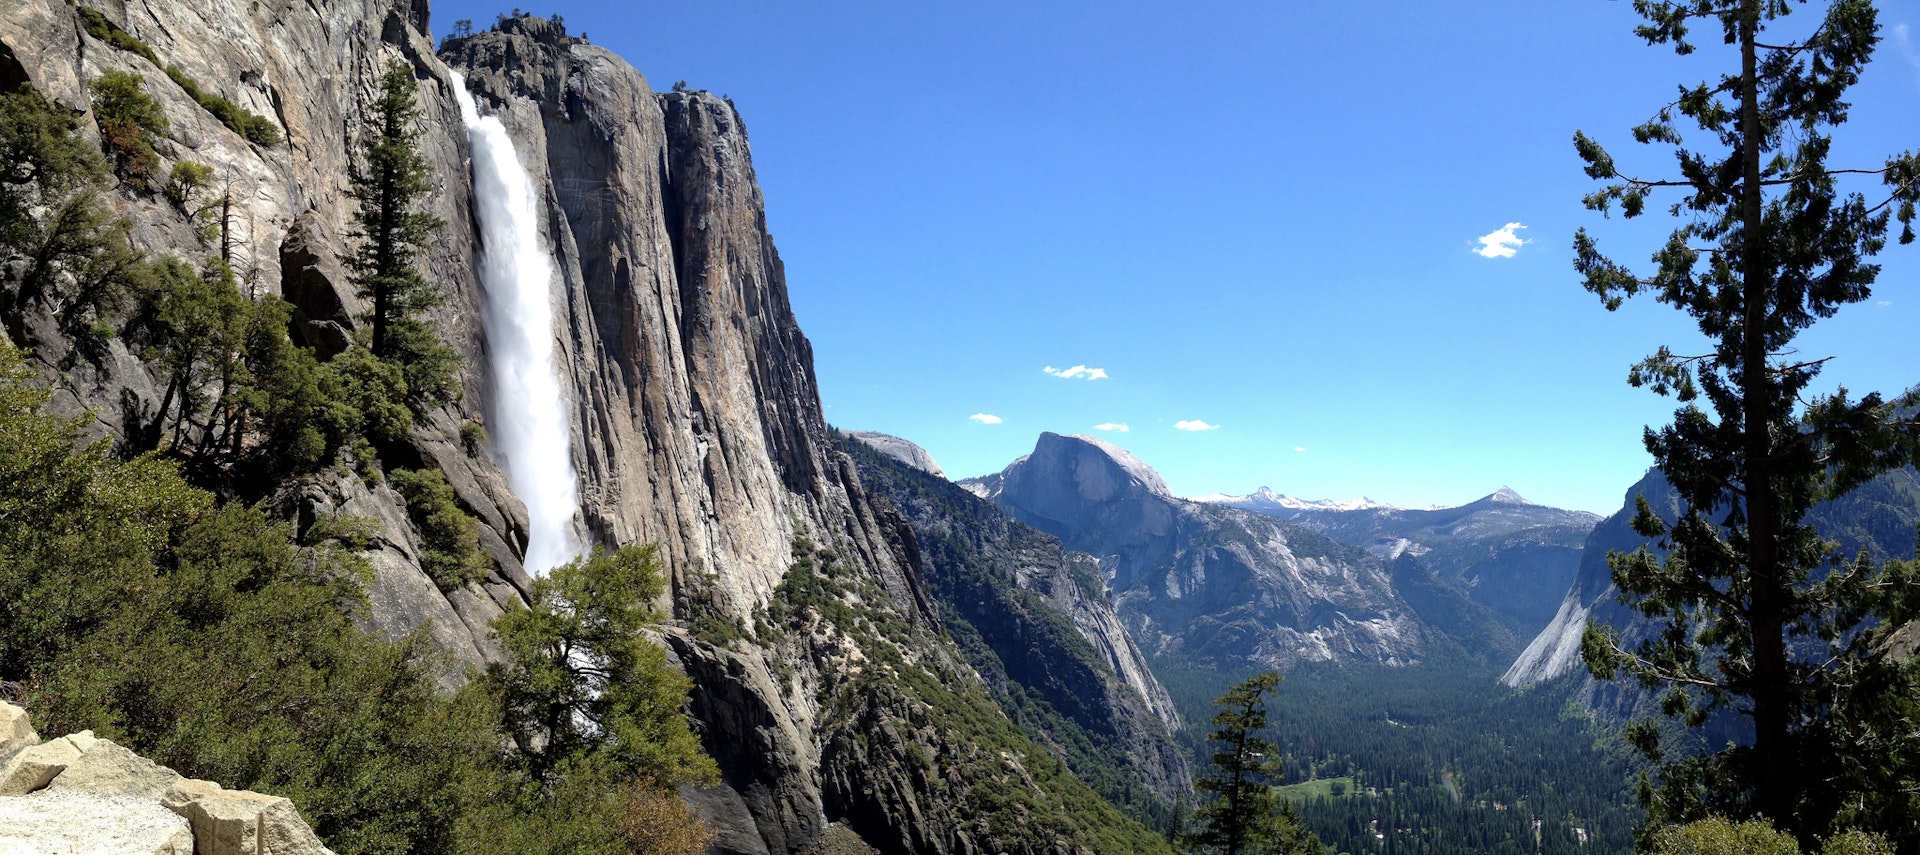 View of Upper Yosemite Fall and the Yosemite Valley. Image by Ray Bouknight / C BY 2.0